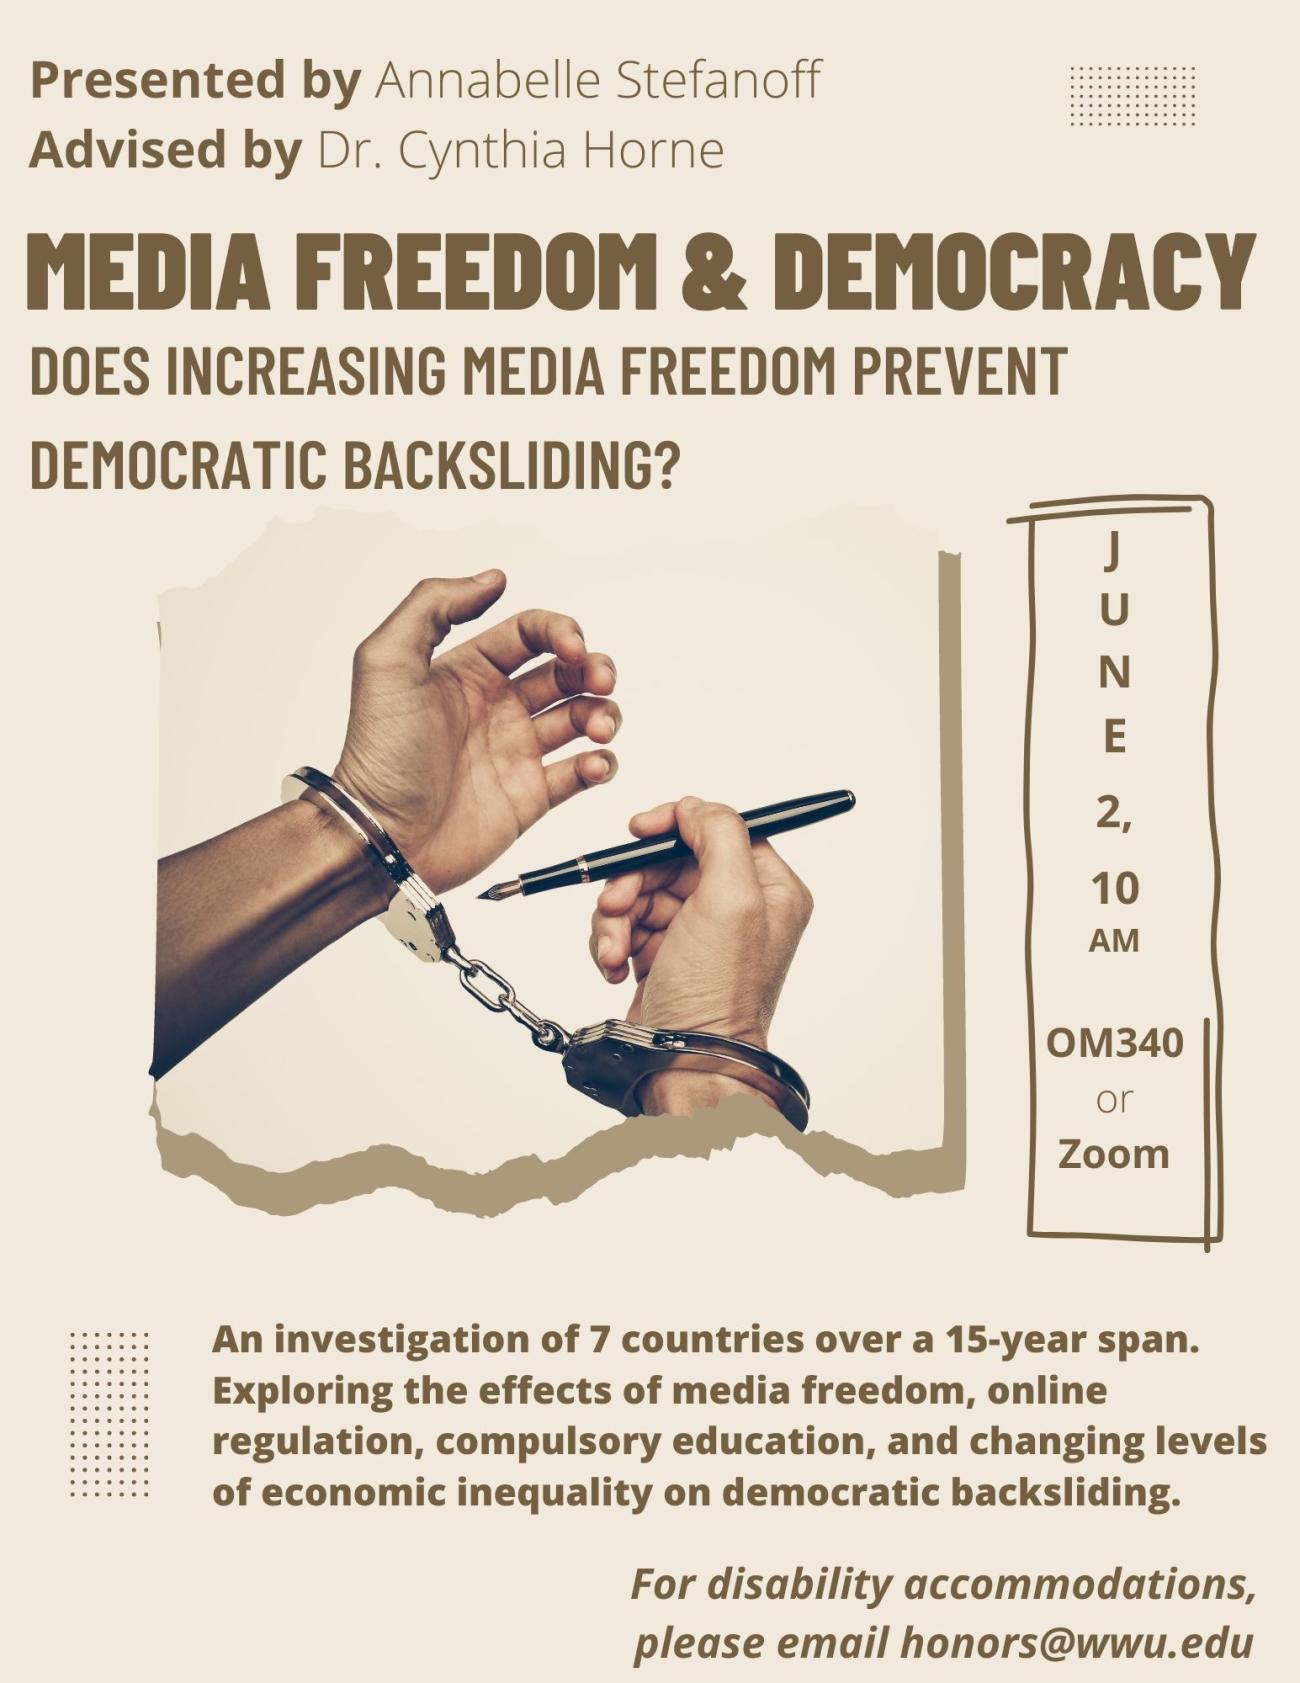 Beige poster with handcuffed hands. Text reads “Media freedom and democracy: does increasing media freedom prevent democratic backsliding? An investigation of 7 countries over a 15-year span. Exploring the effects of media freedom, online regulation, compulsory education, and changing levels of economic inequality on democratic backsliding. June 2, 10:00 AM at Old Main 340 or Zoom. Presented by Annabelle Stefanoff and advised by Dr. Cynthia Horne. For disability accommodations, please email honors@wwu.edu.”